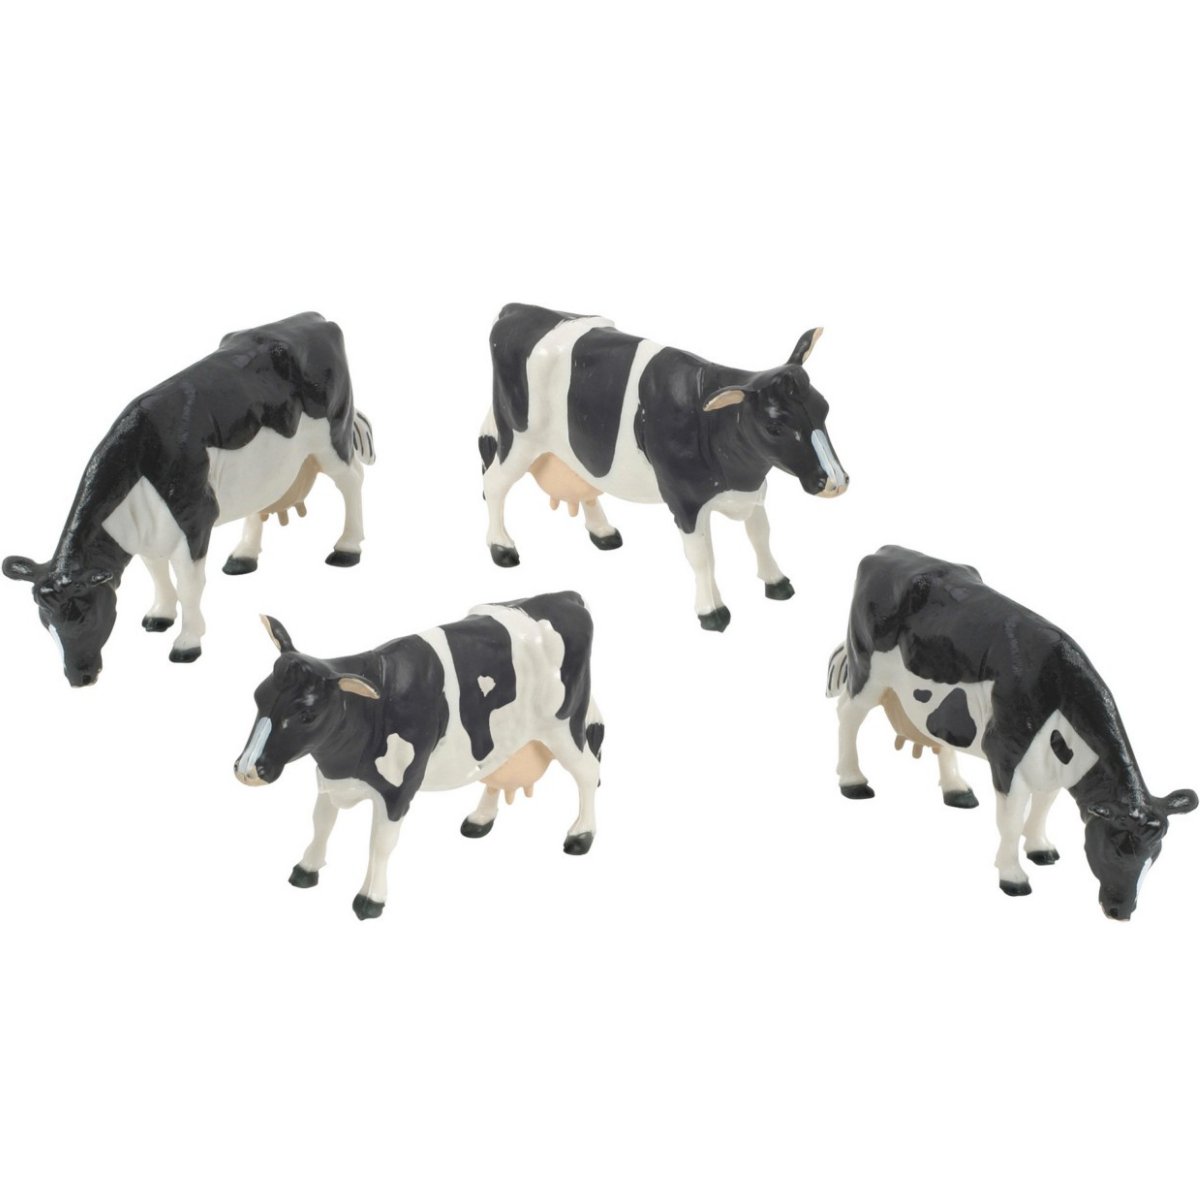 Britains Friesian Cattle 4 Pack - 1:32 Scale - Phillips Hobbies